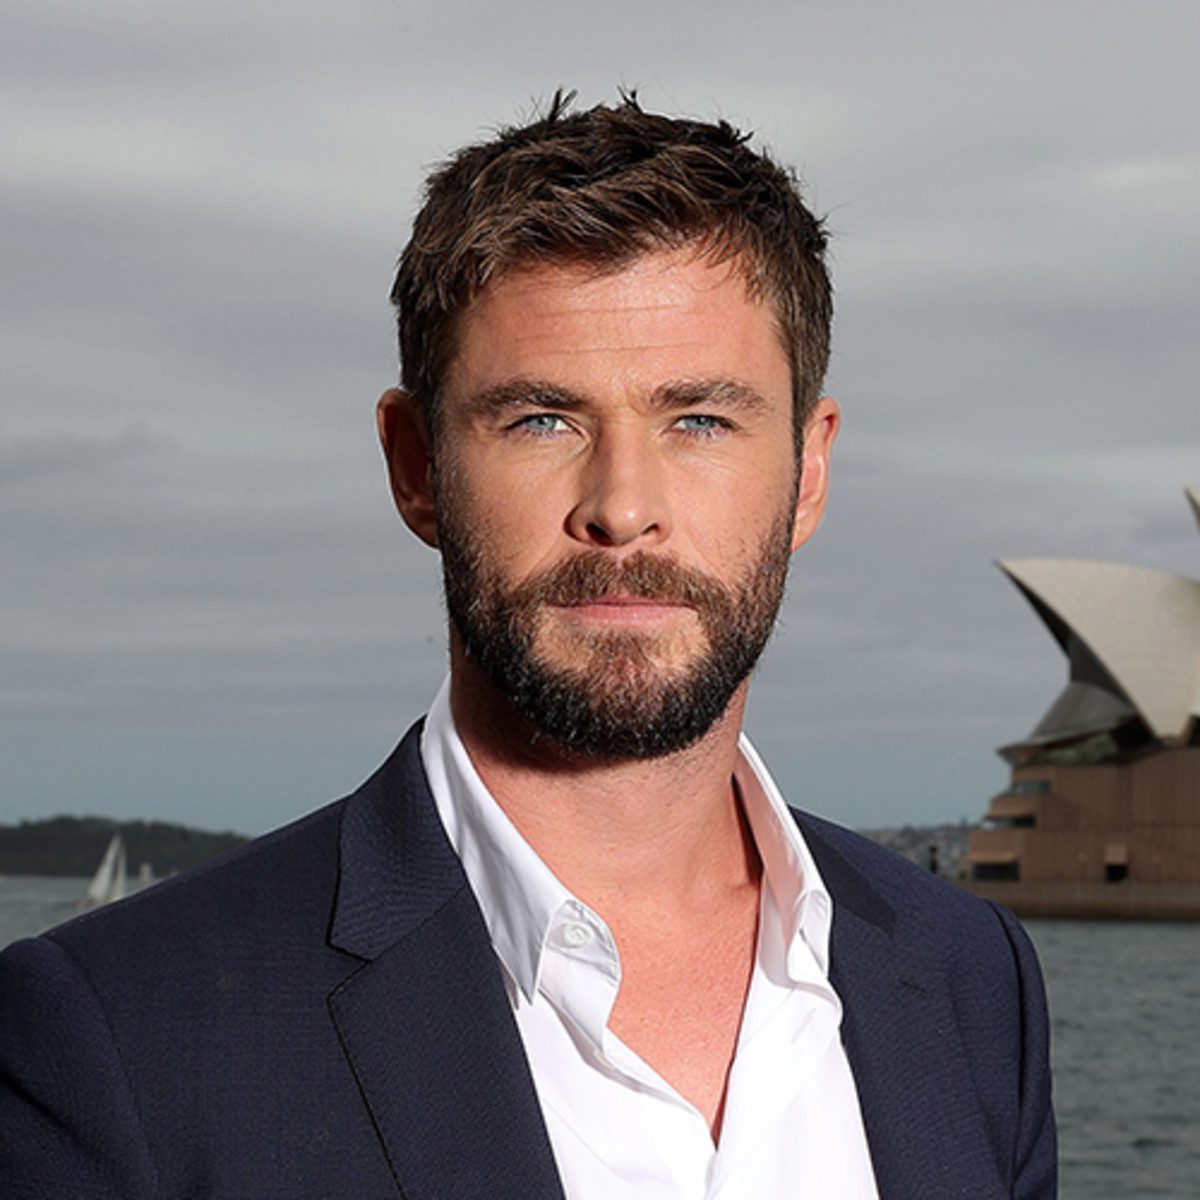 chris-hemsworth-poses-during-a-photo-call-for-thor-ragnarok-on-october-15-2017-in-sydney-australia-photo-by-mark-metcalfe_getty-images-for-disney-square.jpg